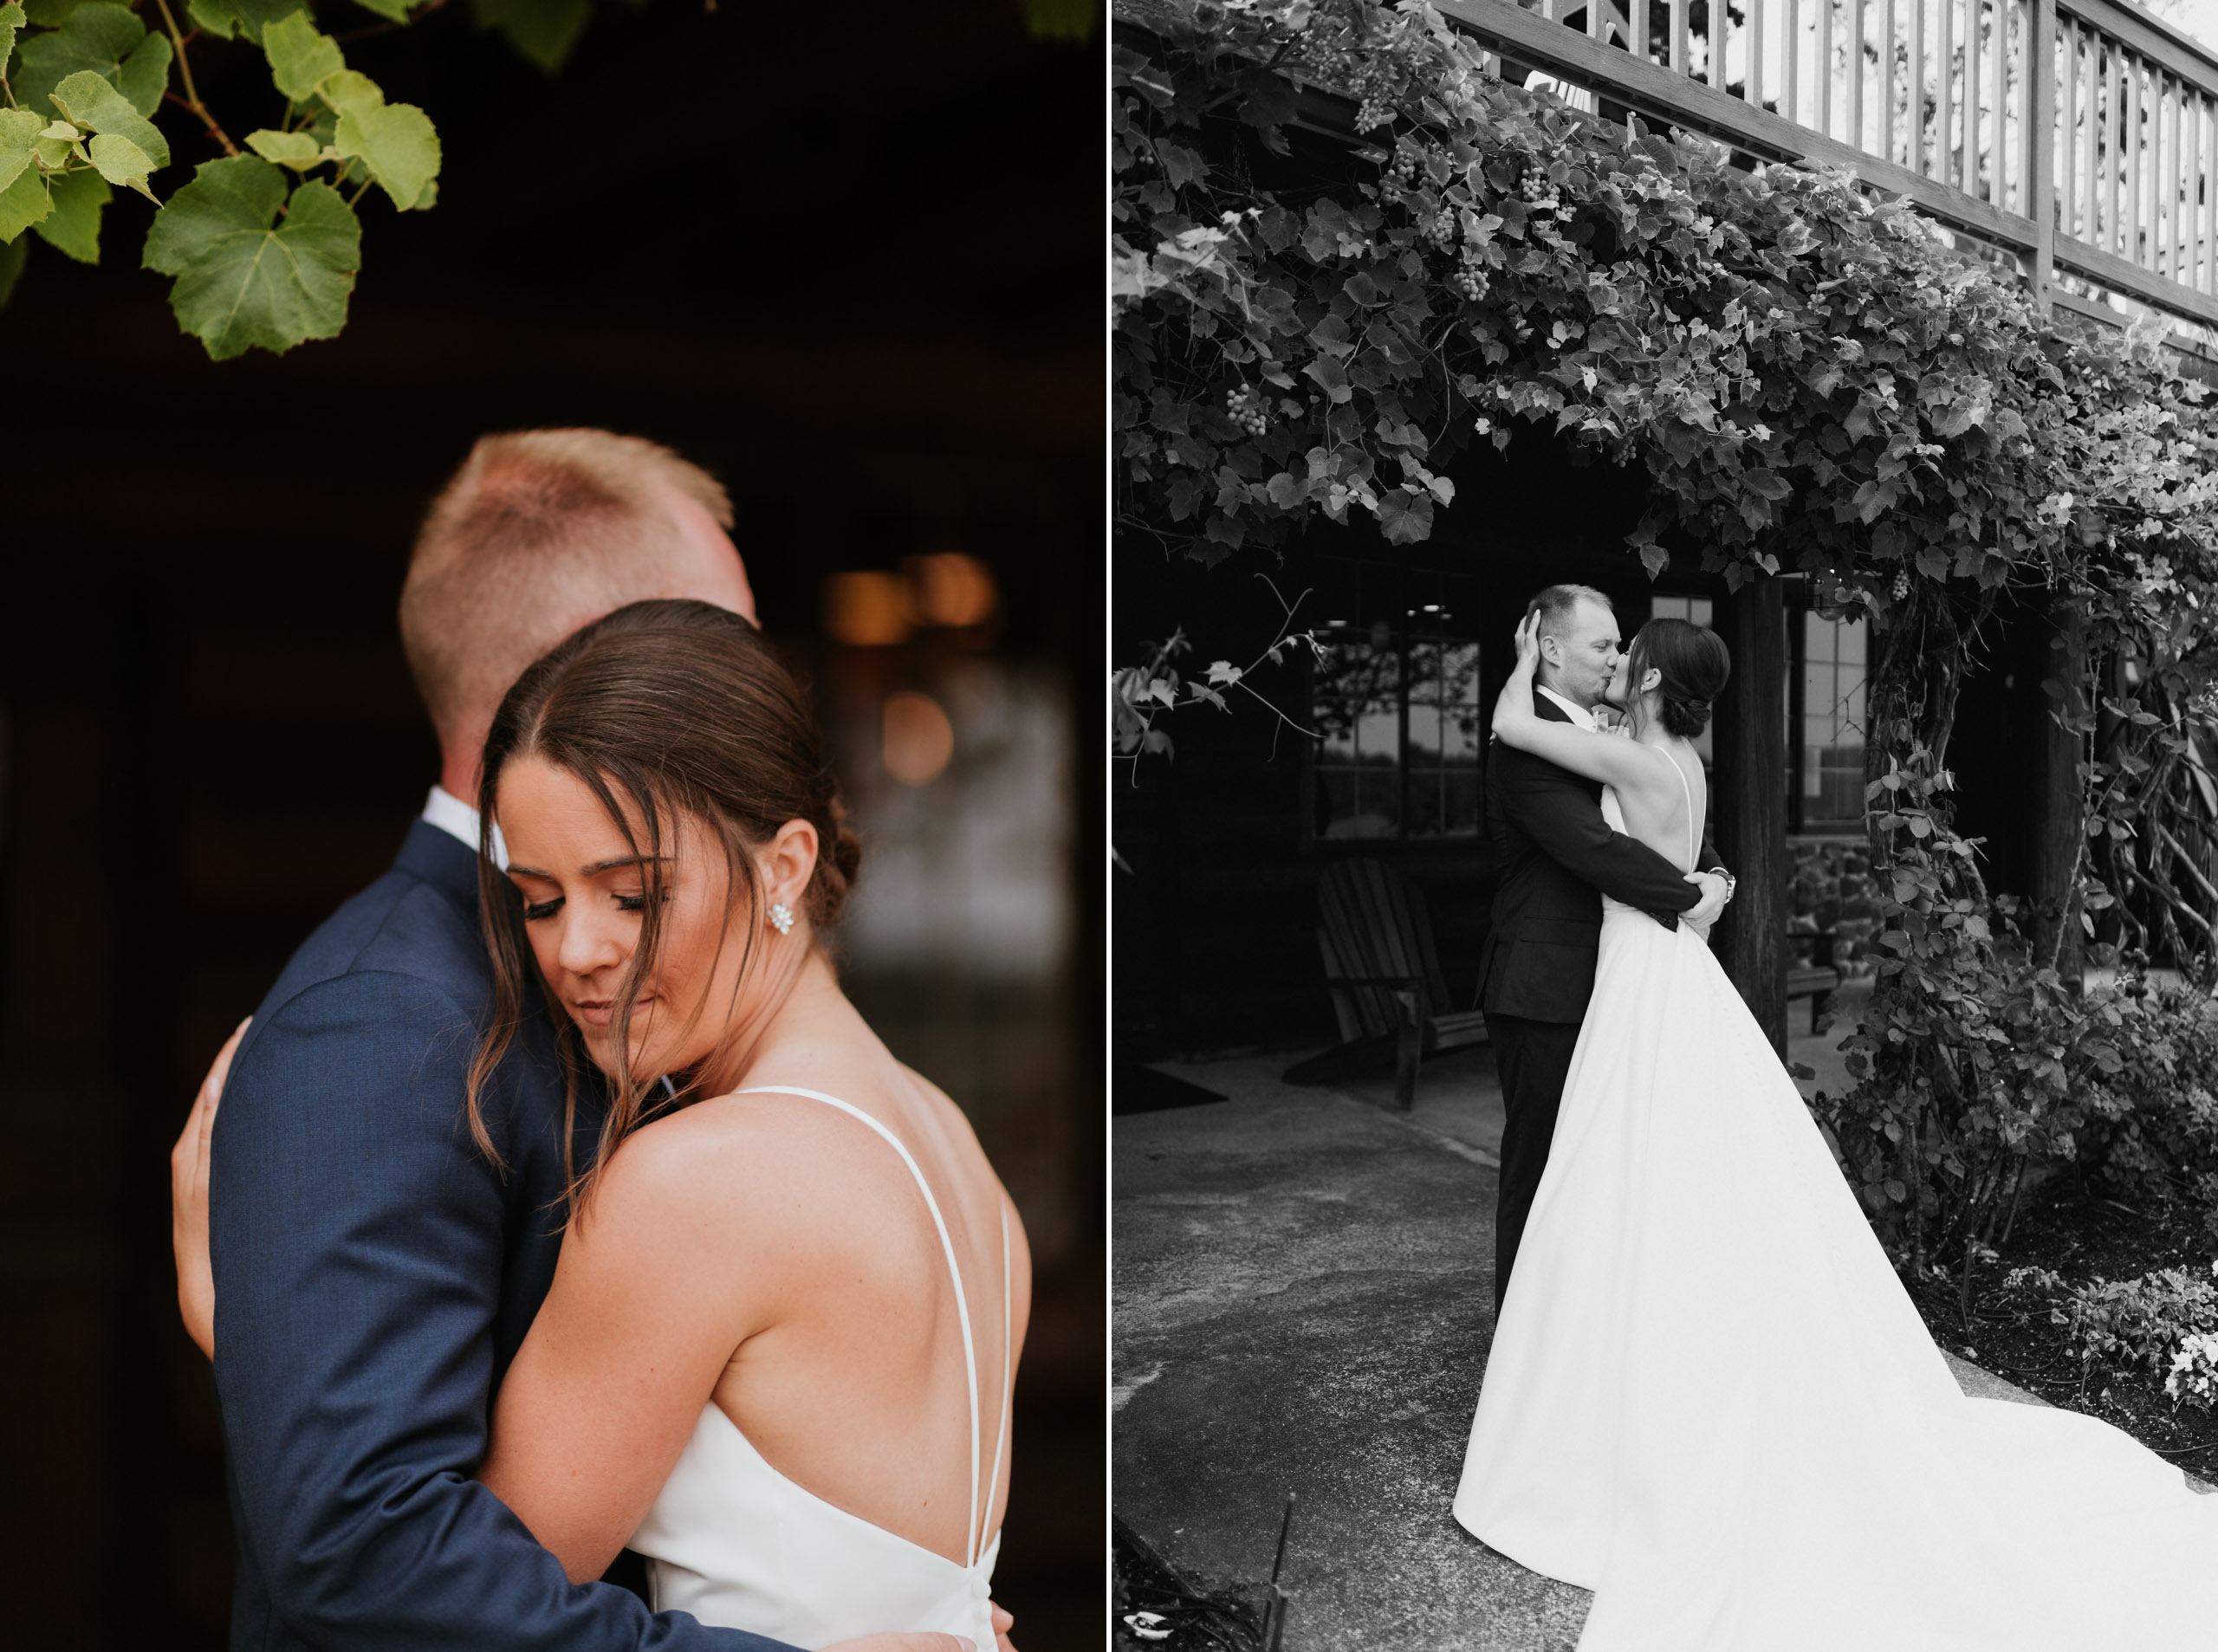 https://breannapluskevin.com/wp-content/uploads/photo-gallery/imported_from_media_libray/kiana-lodge-wedding-bm-breanna-plus-kevin-18.jpg